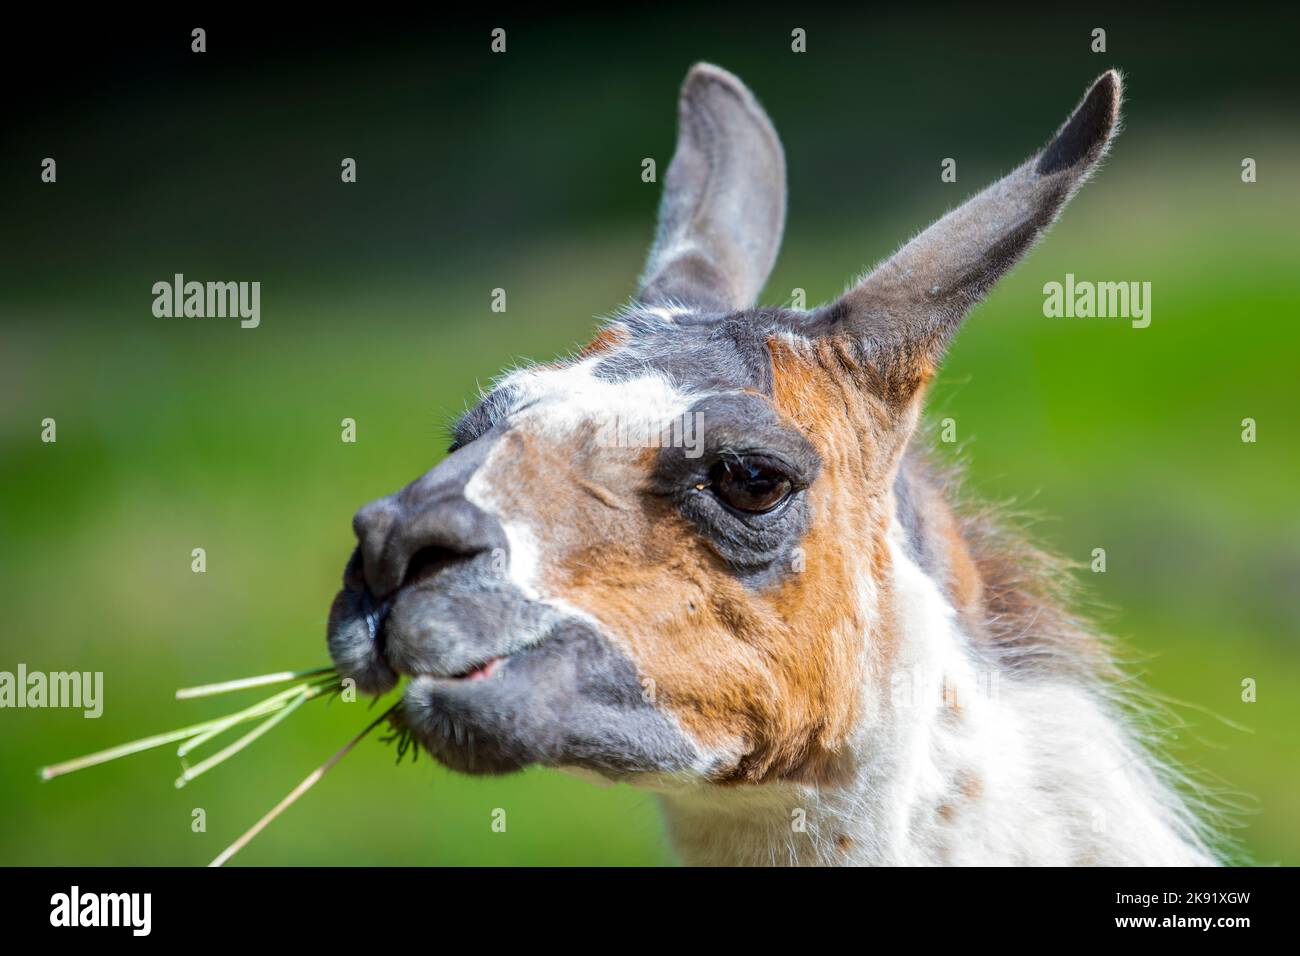 Lama looks into the camera and eats grass. Close-up portrait of a llama chewing grass. Stock Photo